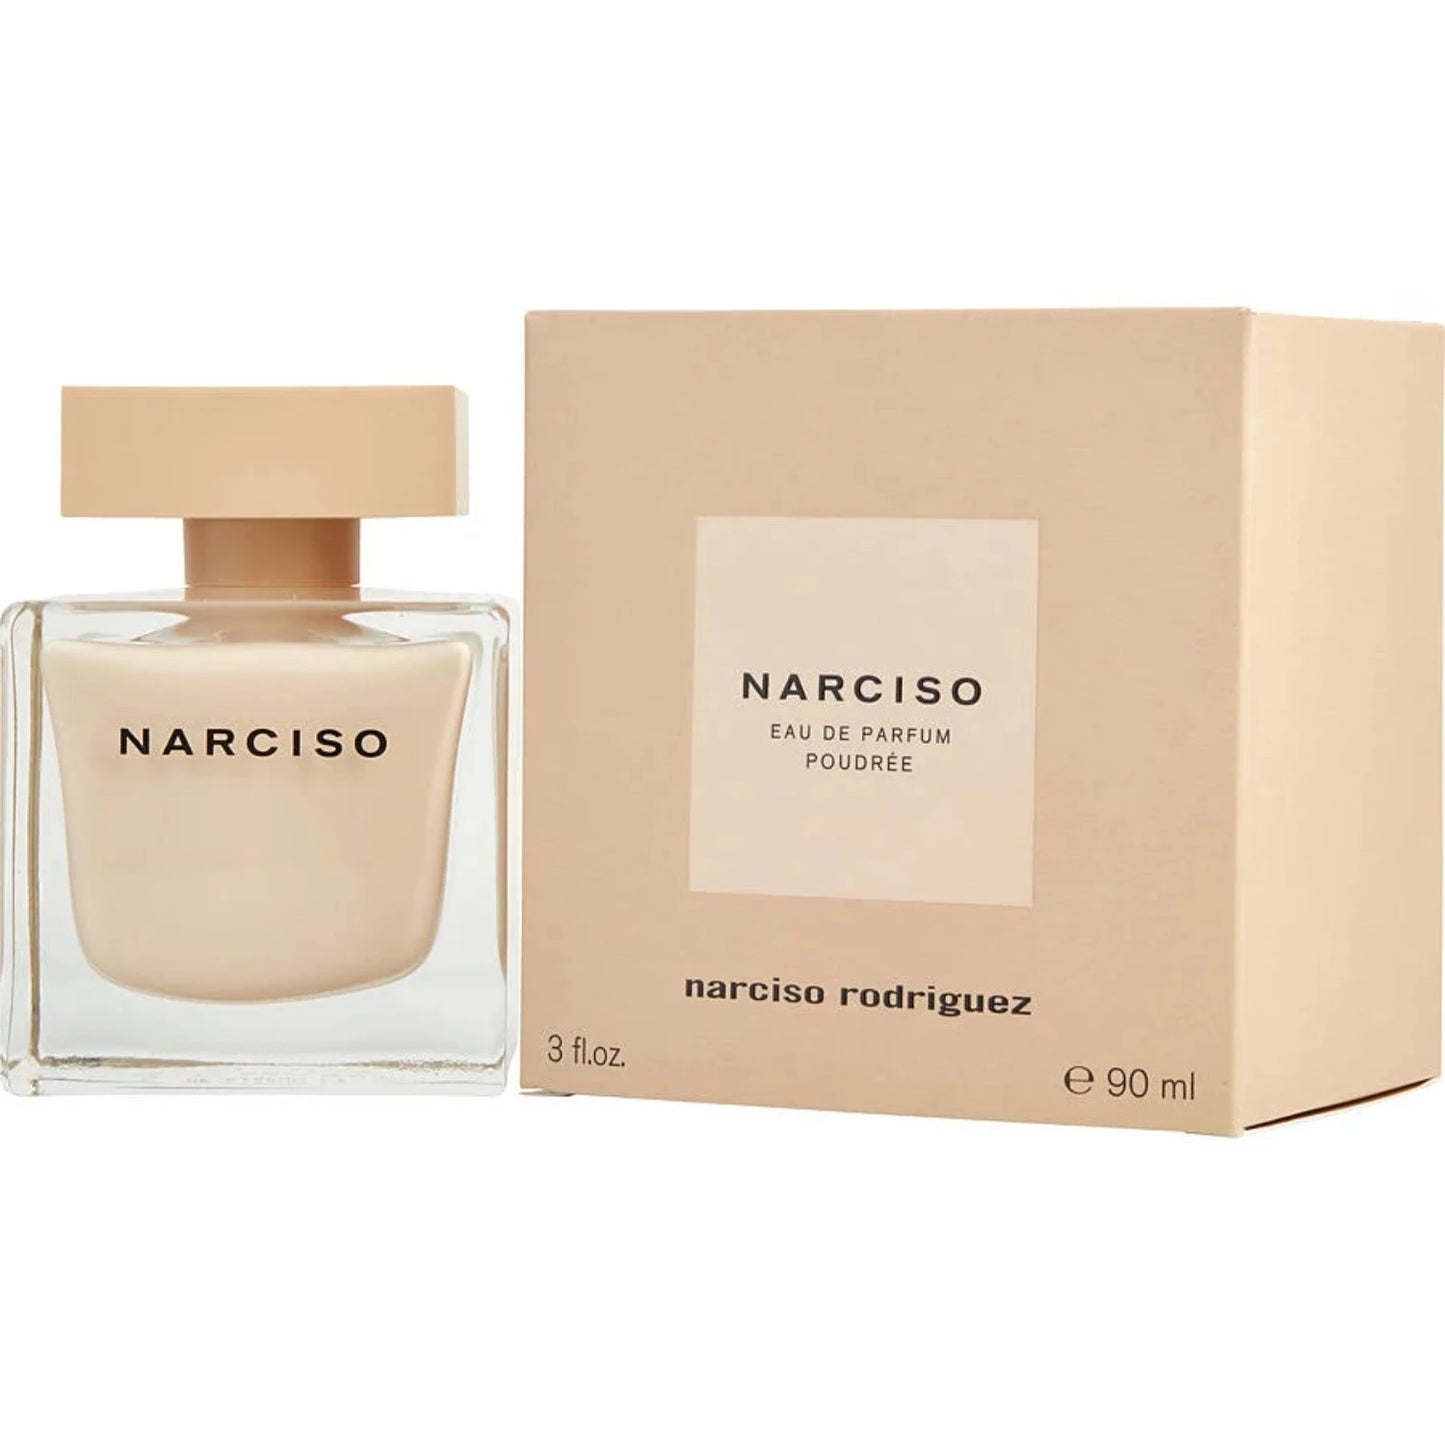 Narciso Poudree Eau De Parfum Spray By Narciso Rodriguez for women